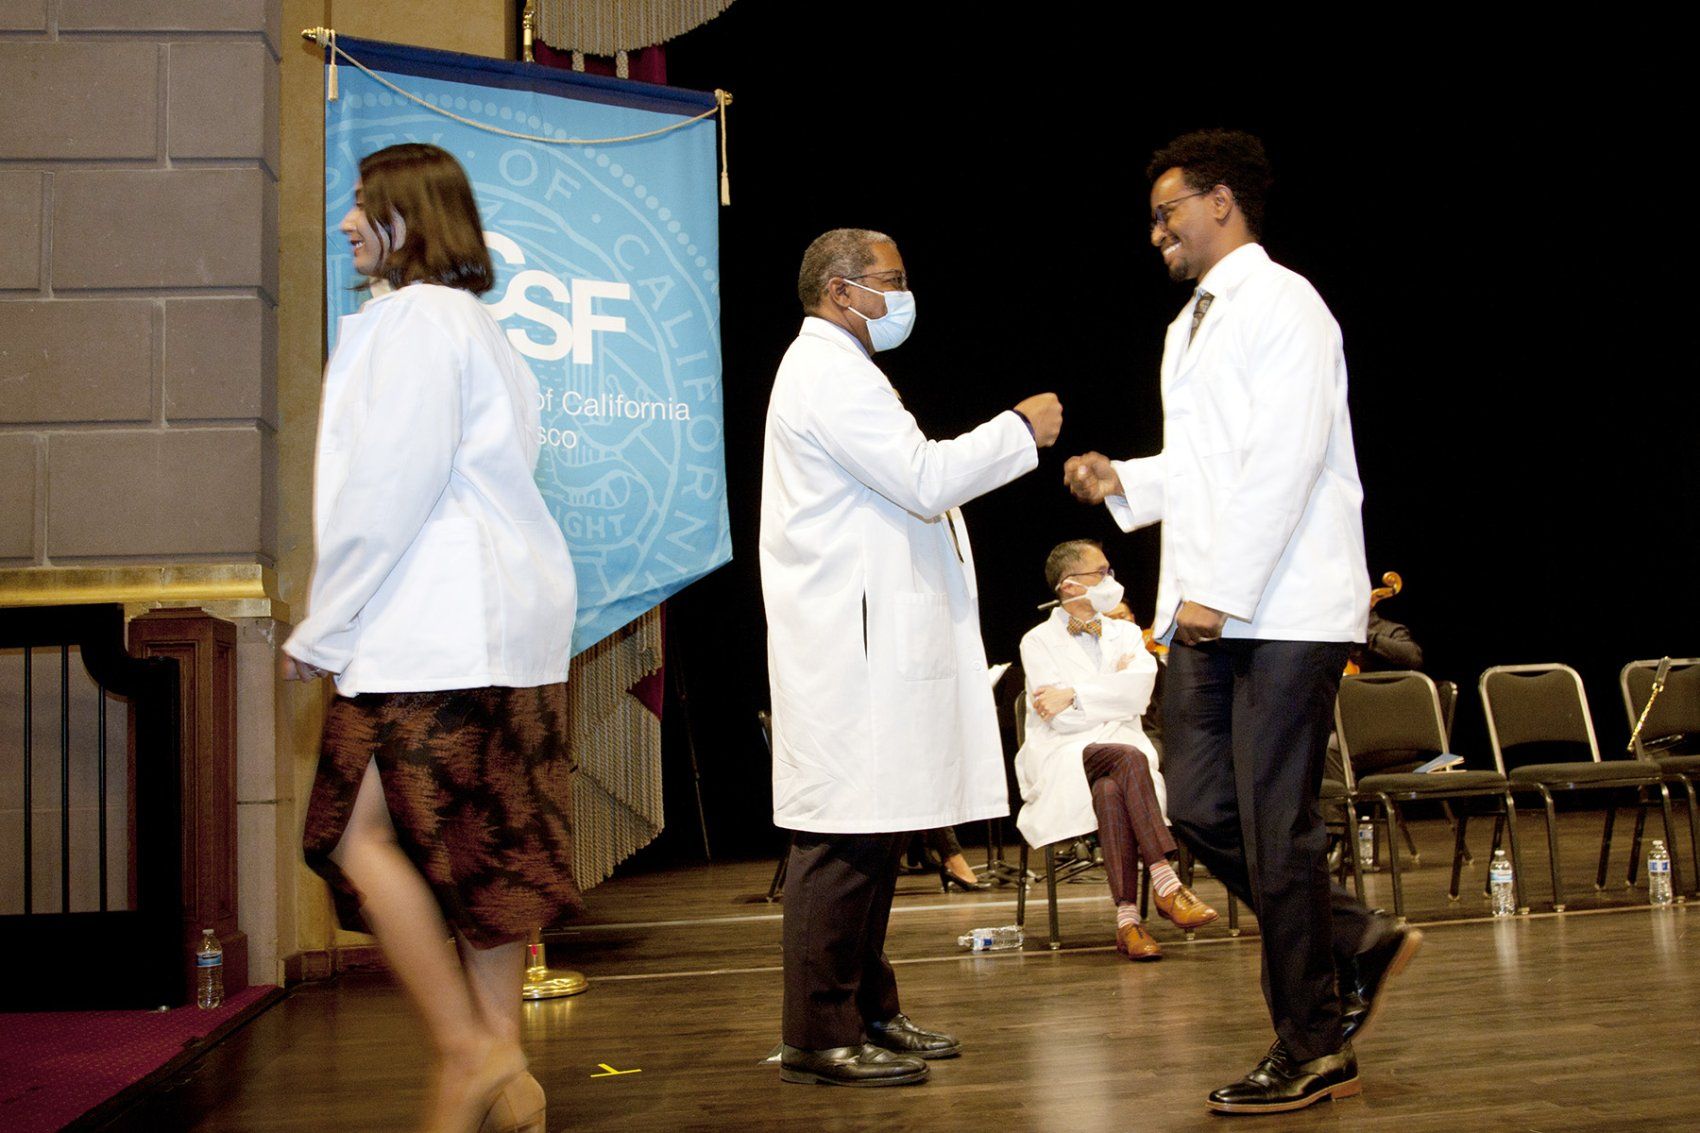 UCSF School of Medicine Dean Talmadge E. King Jr., MD, (center) fist bumps a new medical student in a white coat